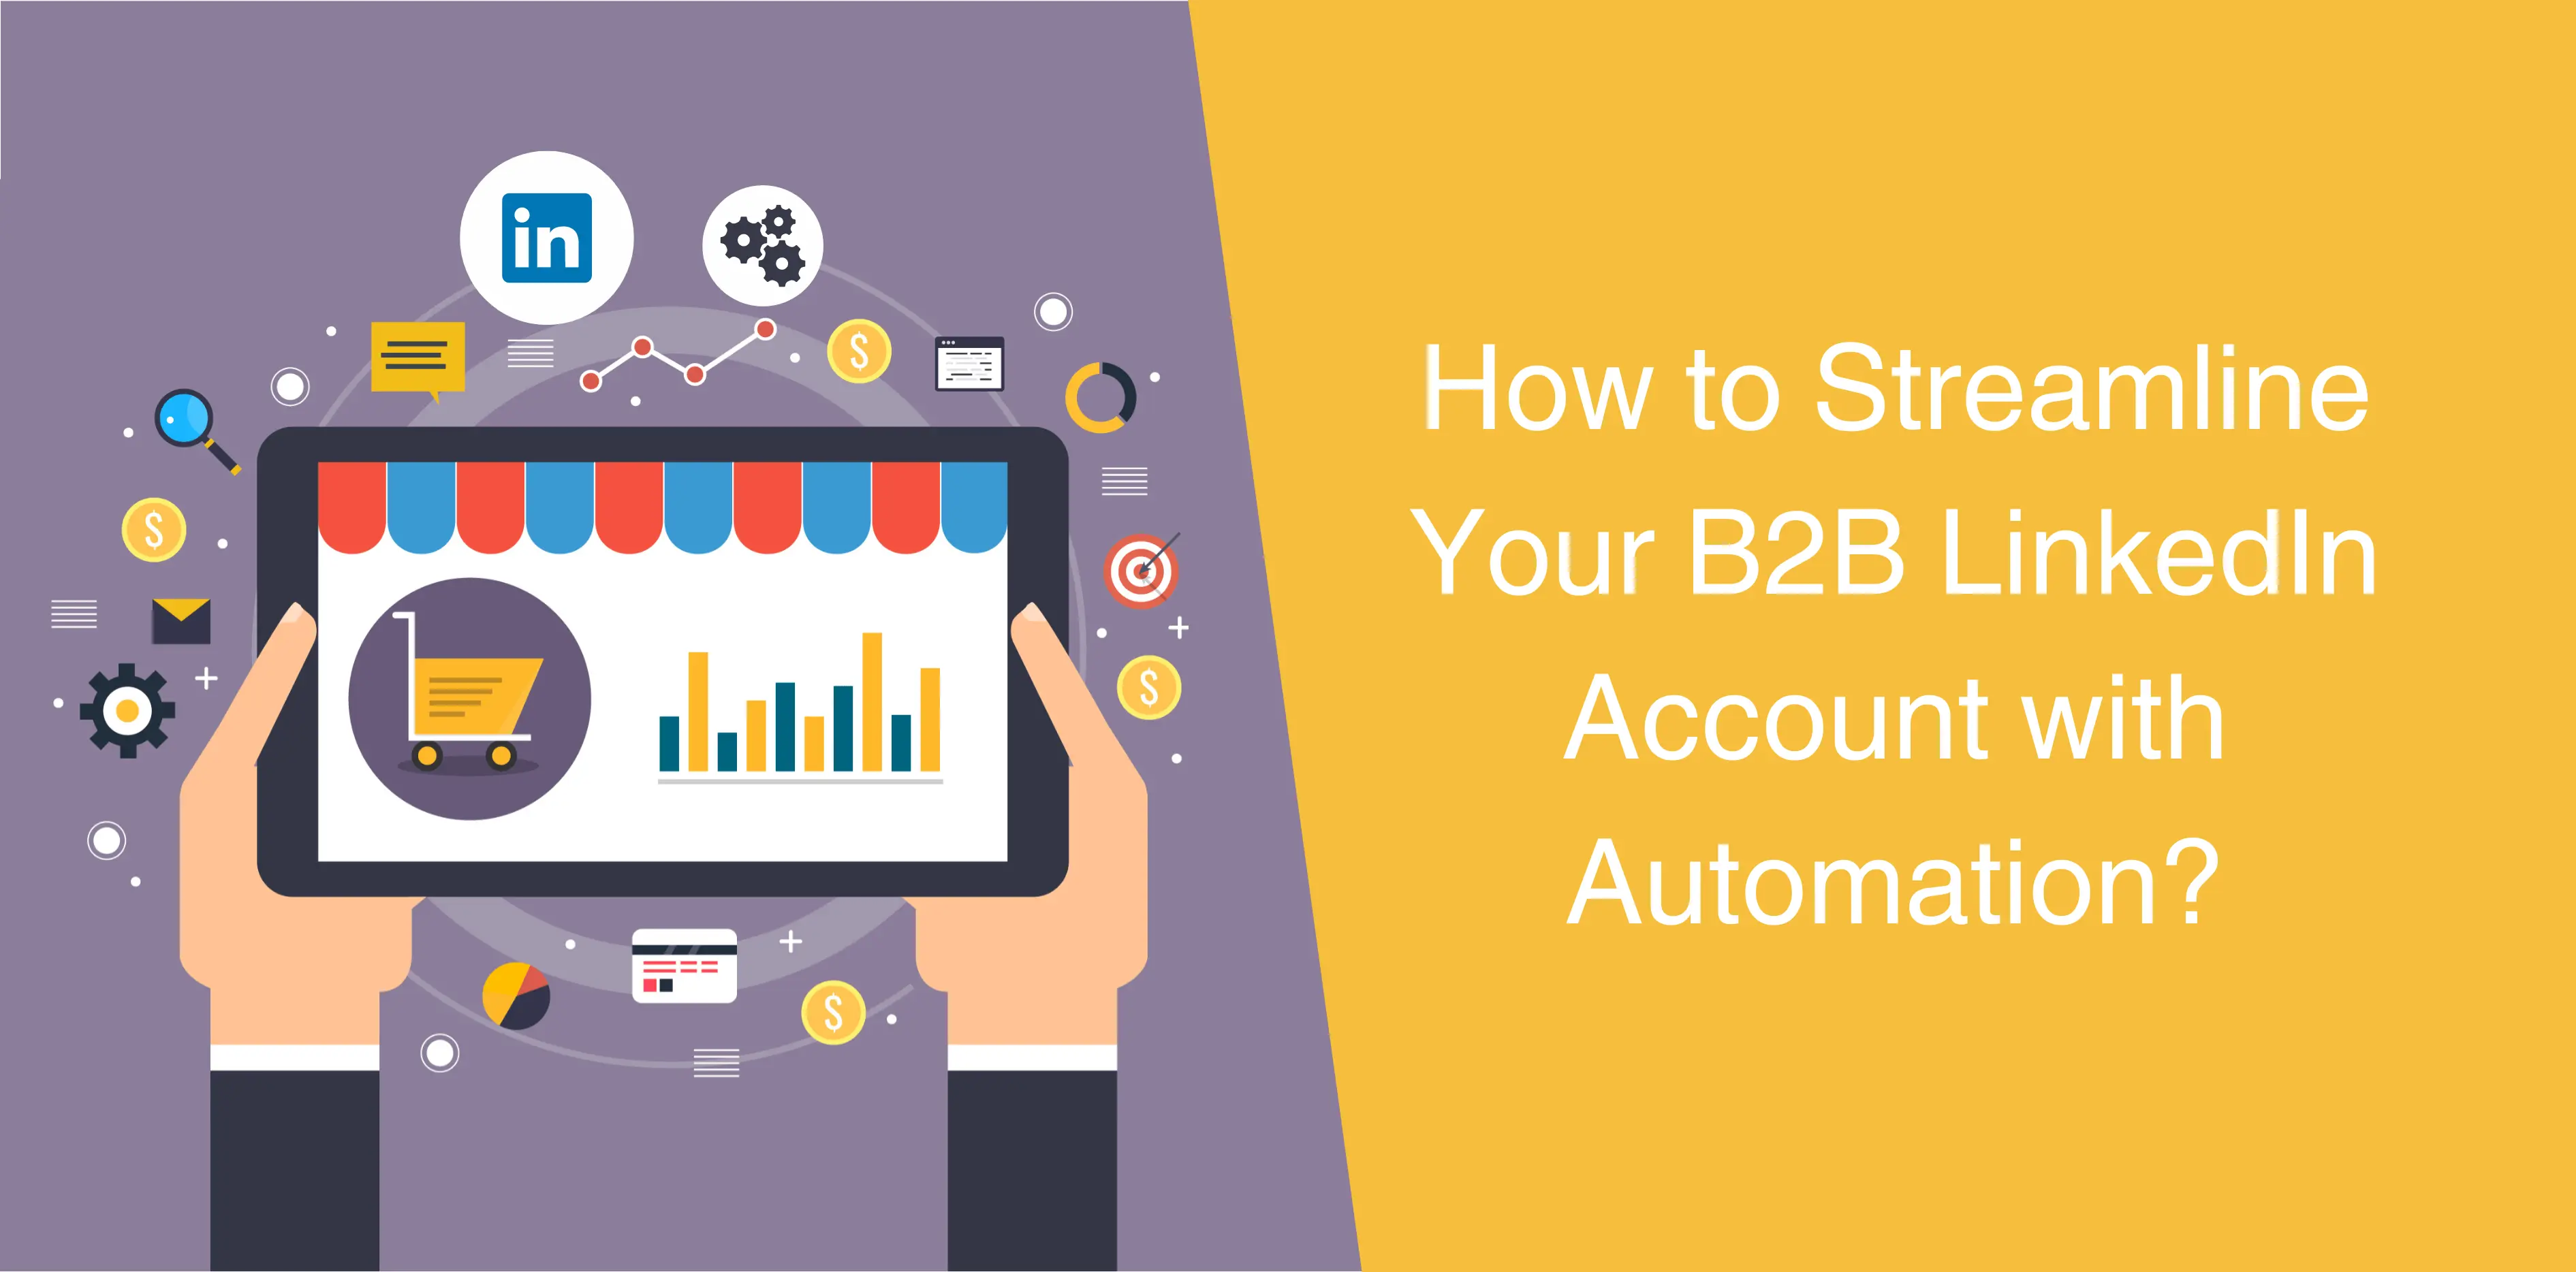 How to Streamline Your B2B LinkedIn Account with Automation?